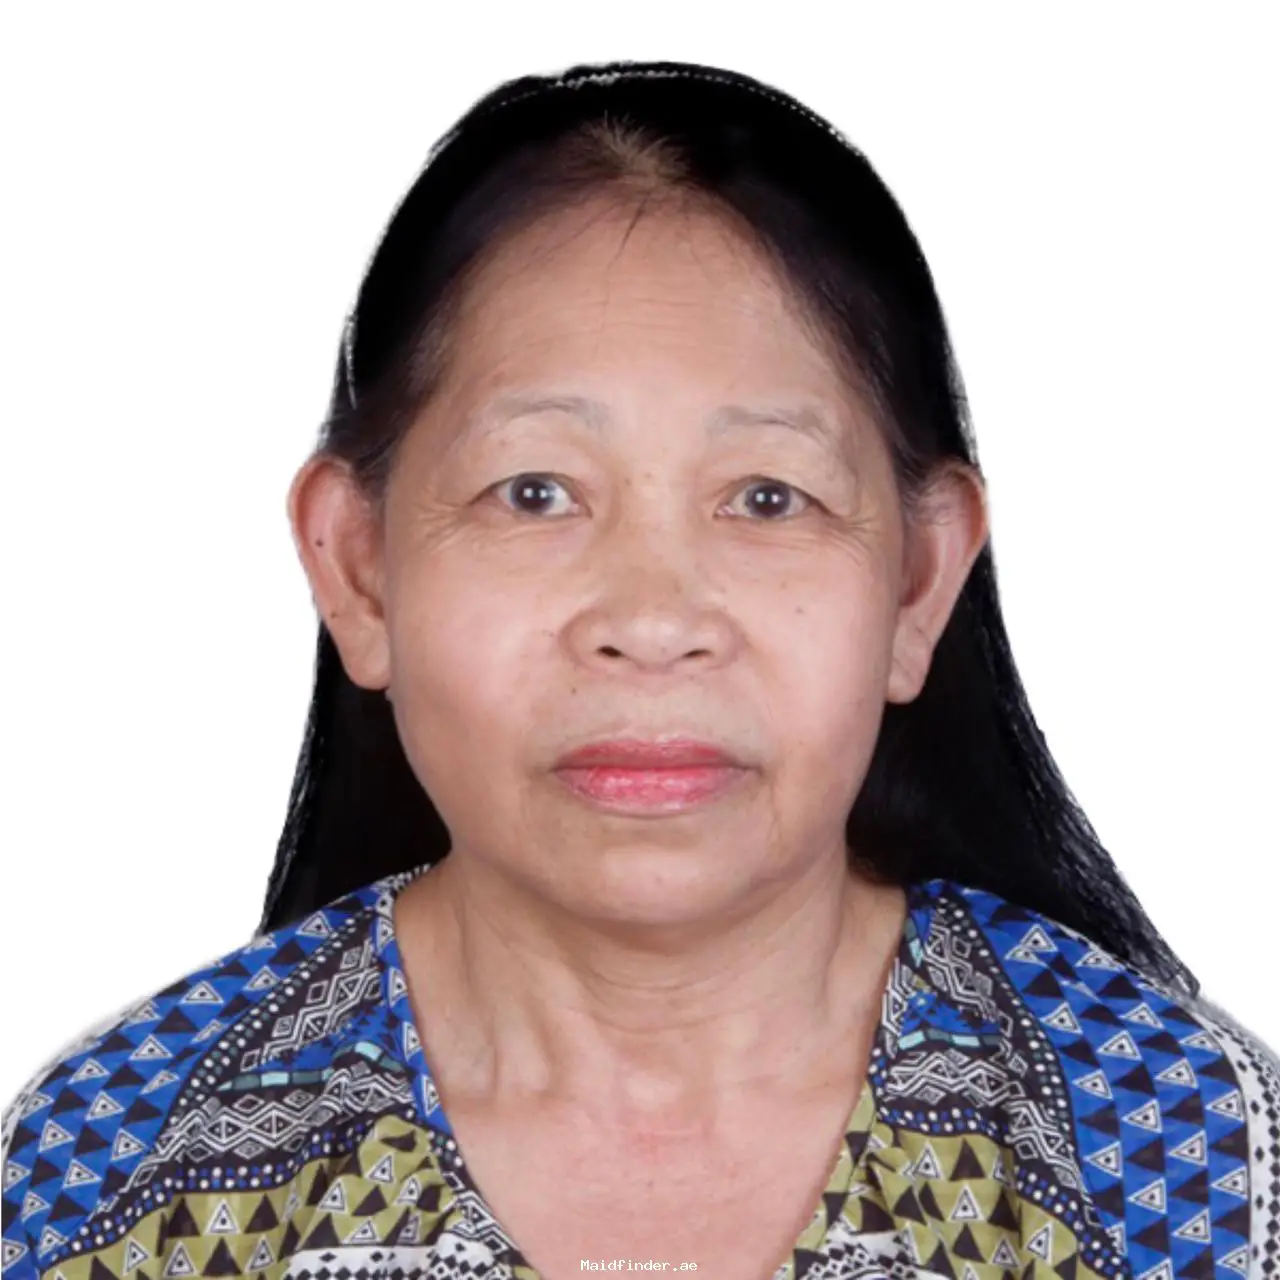 Maid Profile Picture 433739872_740292288151763_7262433495140128155_n.webp /home3/xgcwidmy/public_html/maid/